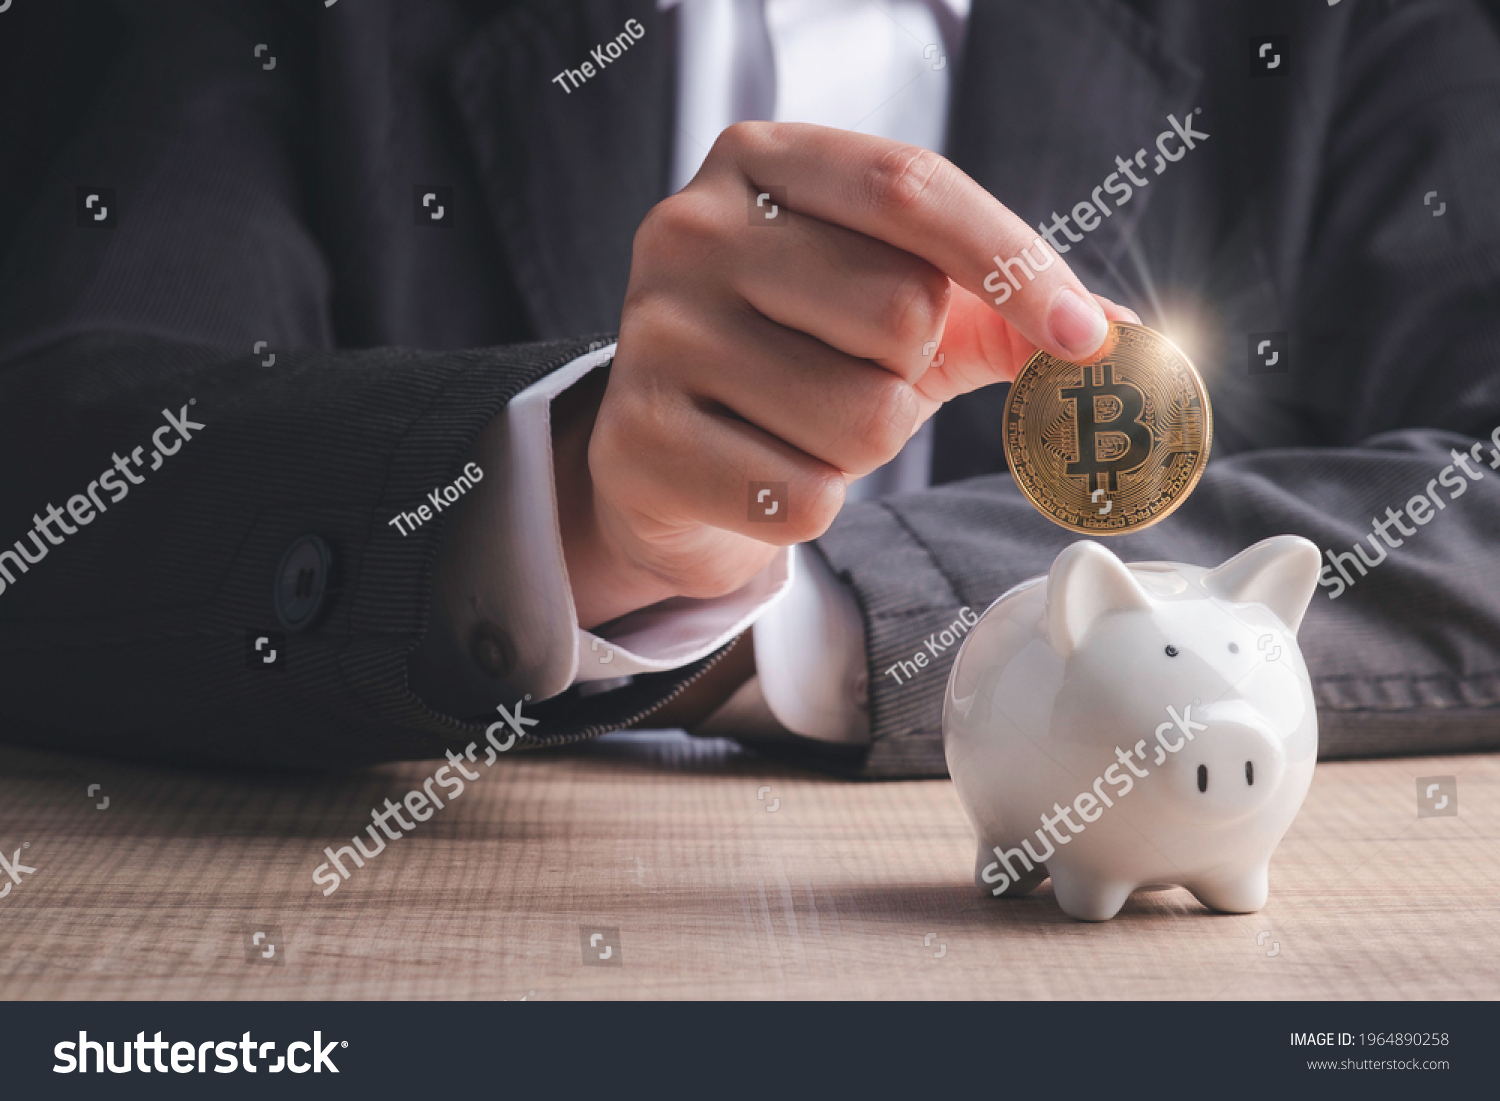 Bitcoin investment concept. Businessman hand holding gold coin cryptocurrency digital money  putting into  piggy bank  on table in black background. #1964890258